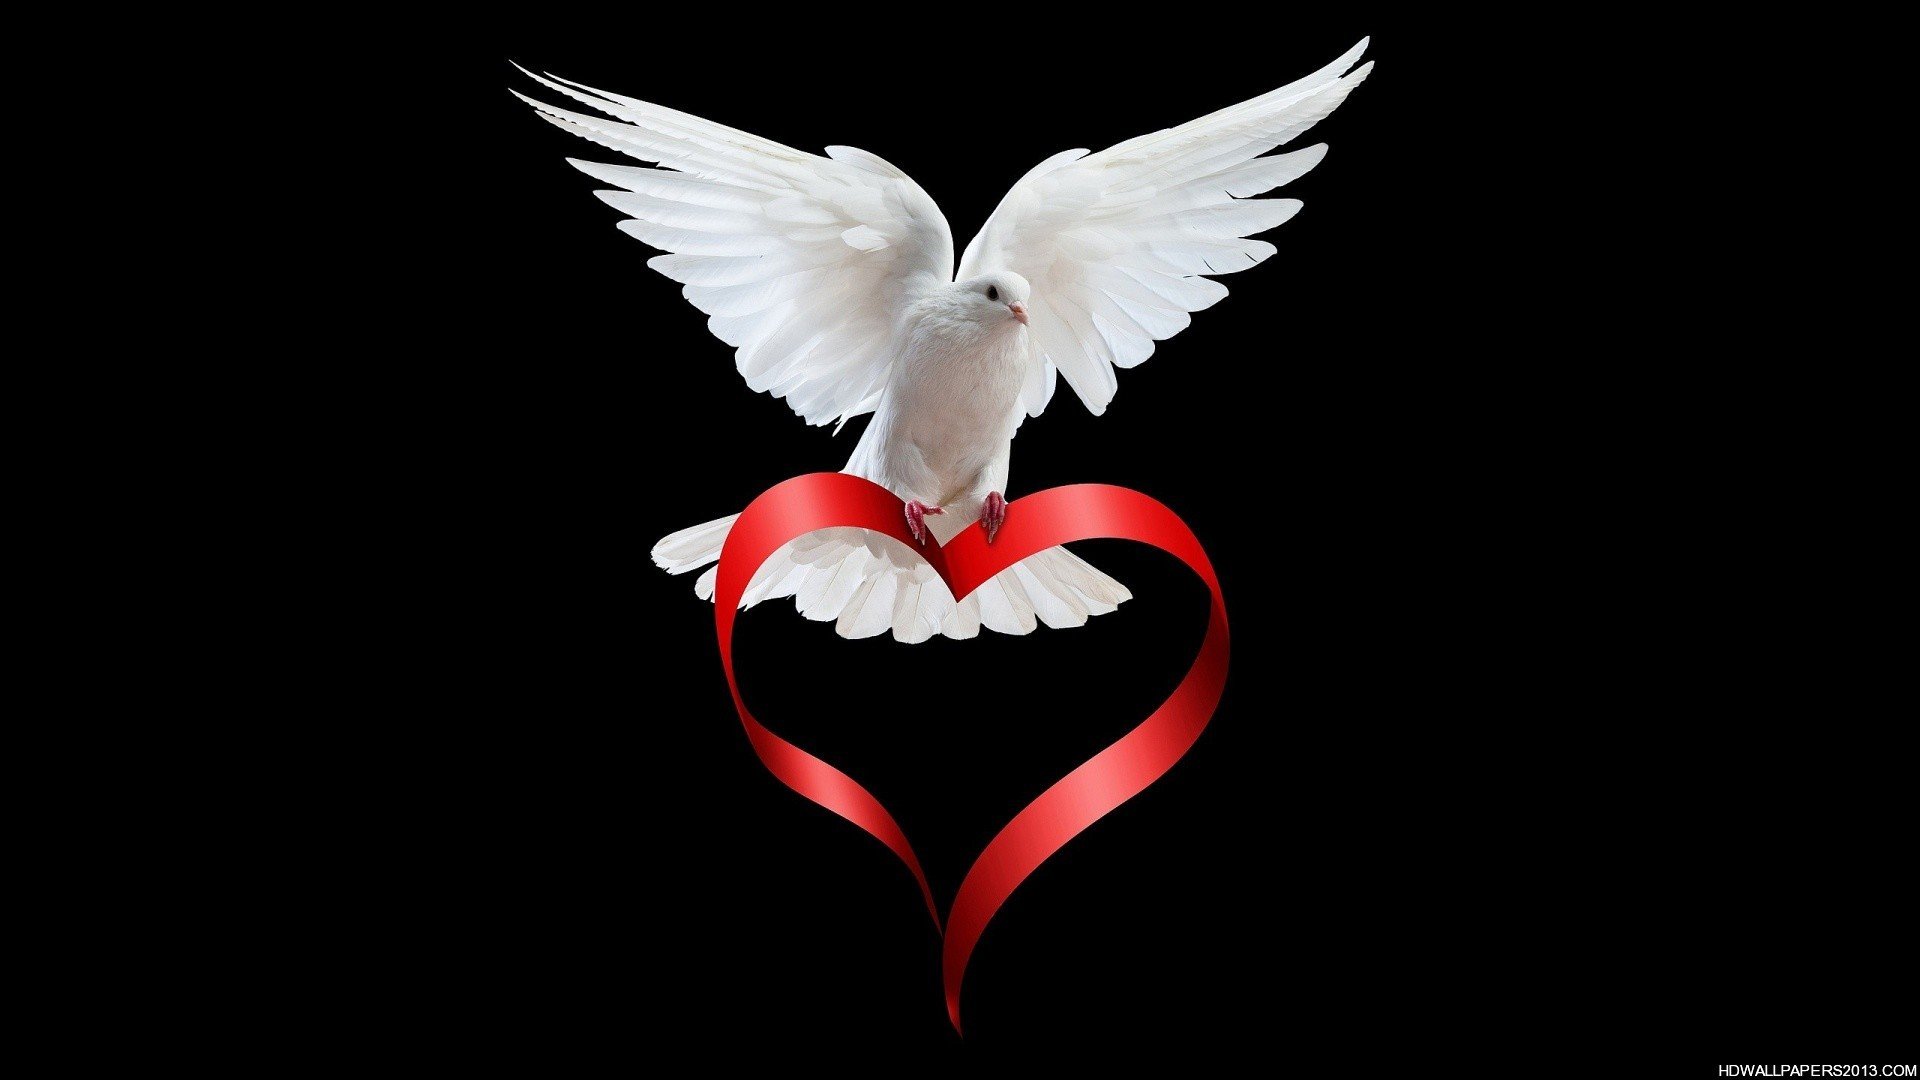 White Dove Wallpaper Download High Definition Wallpapers High